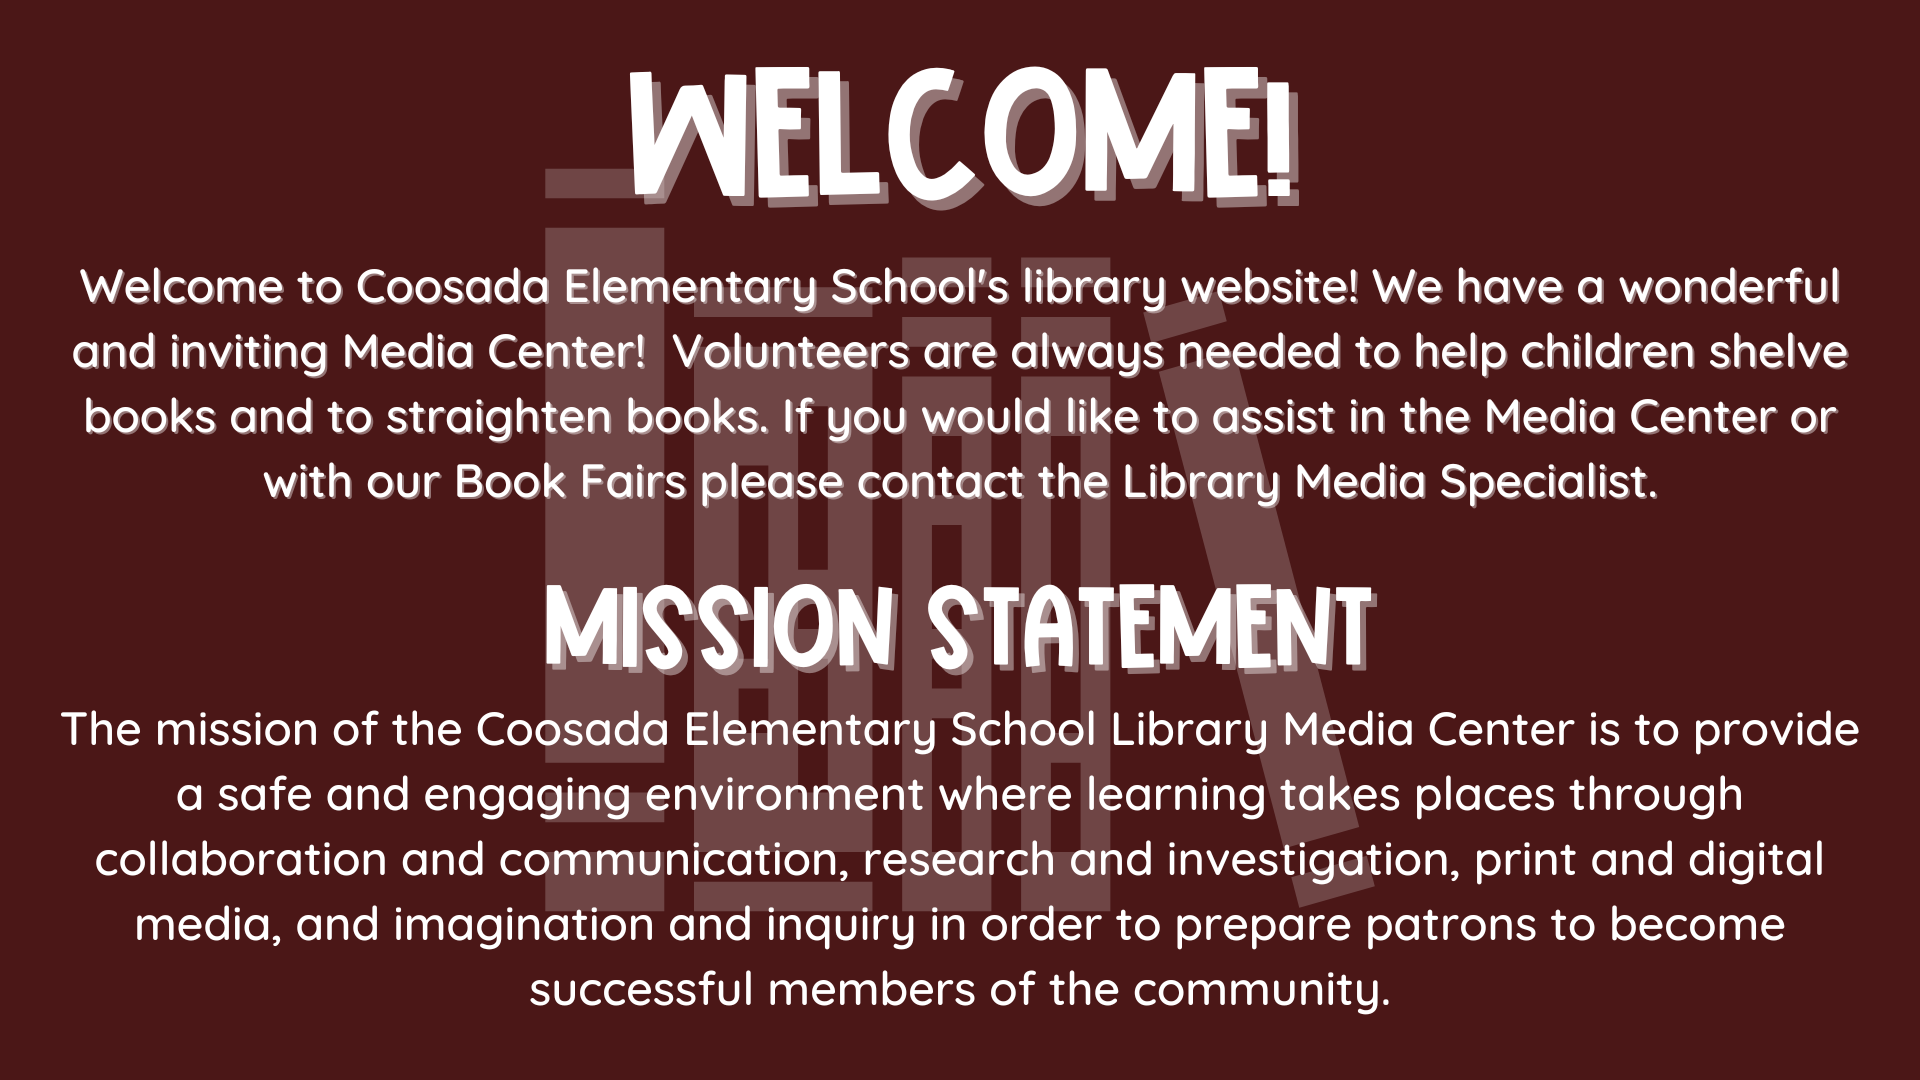 Welcome to Coosada Elementary School's library website!  We have a wonderful and inviting Media Center!  Volunteers are always needed to help children shelve books and to straighten books.  If you would like to assist in the Media Center or with our Book Fairs please contact the Library Media Specialist.     Mission Statement  The mission of the Coosada Elementary School Library Media Center is to provide a safe and engaging environment where learning takes places through collaboration and communication, research and investigation, print and digital media, and imagination and inquiry in order to prepare patrons to become successful members of the community.   